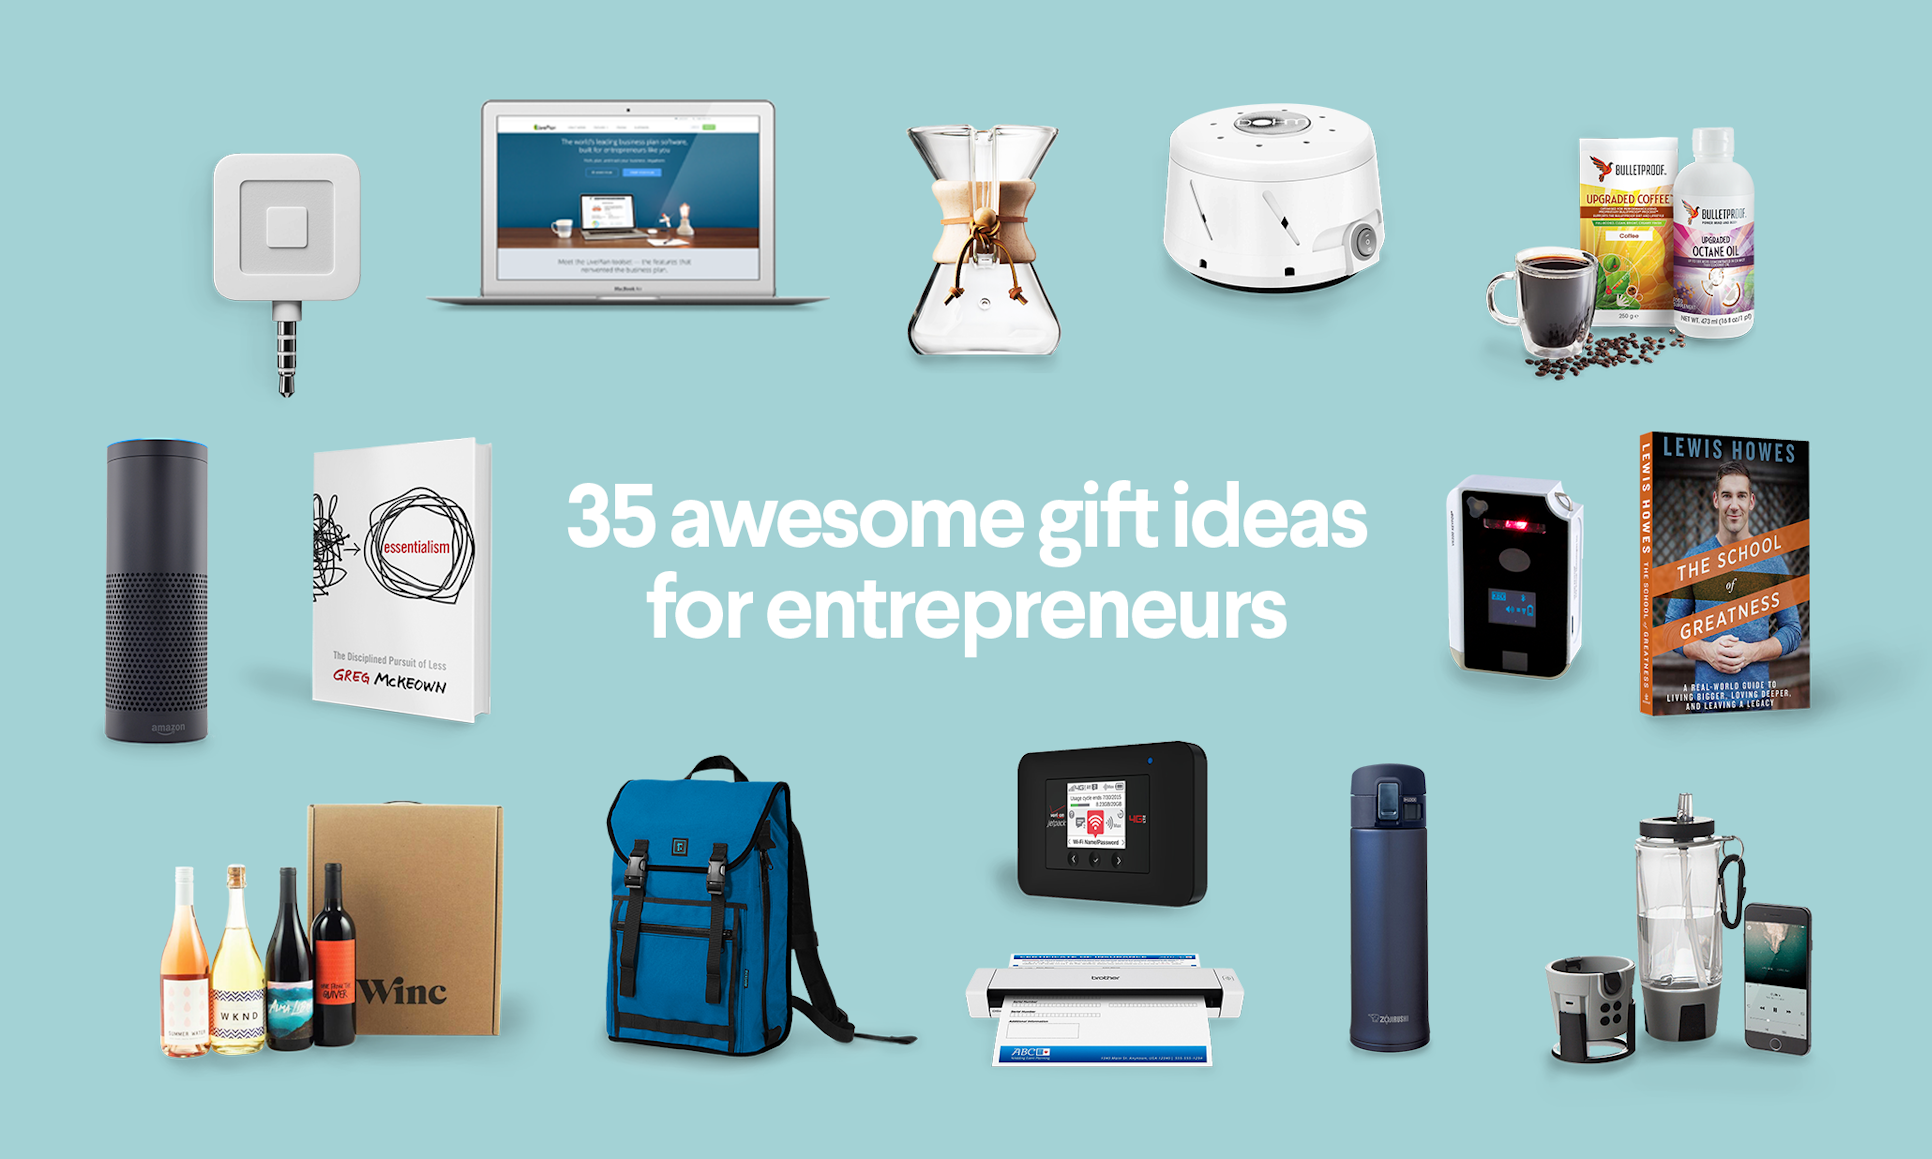 17 Creative Giveaways Ideas For Small Businesses People Love